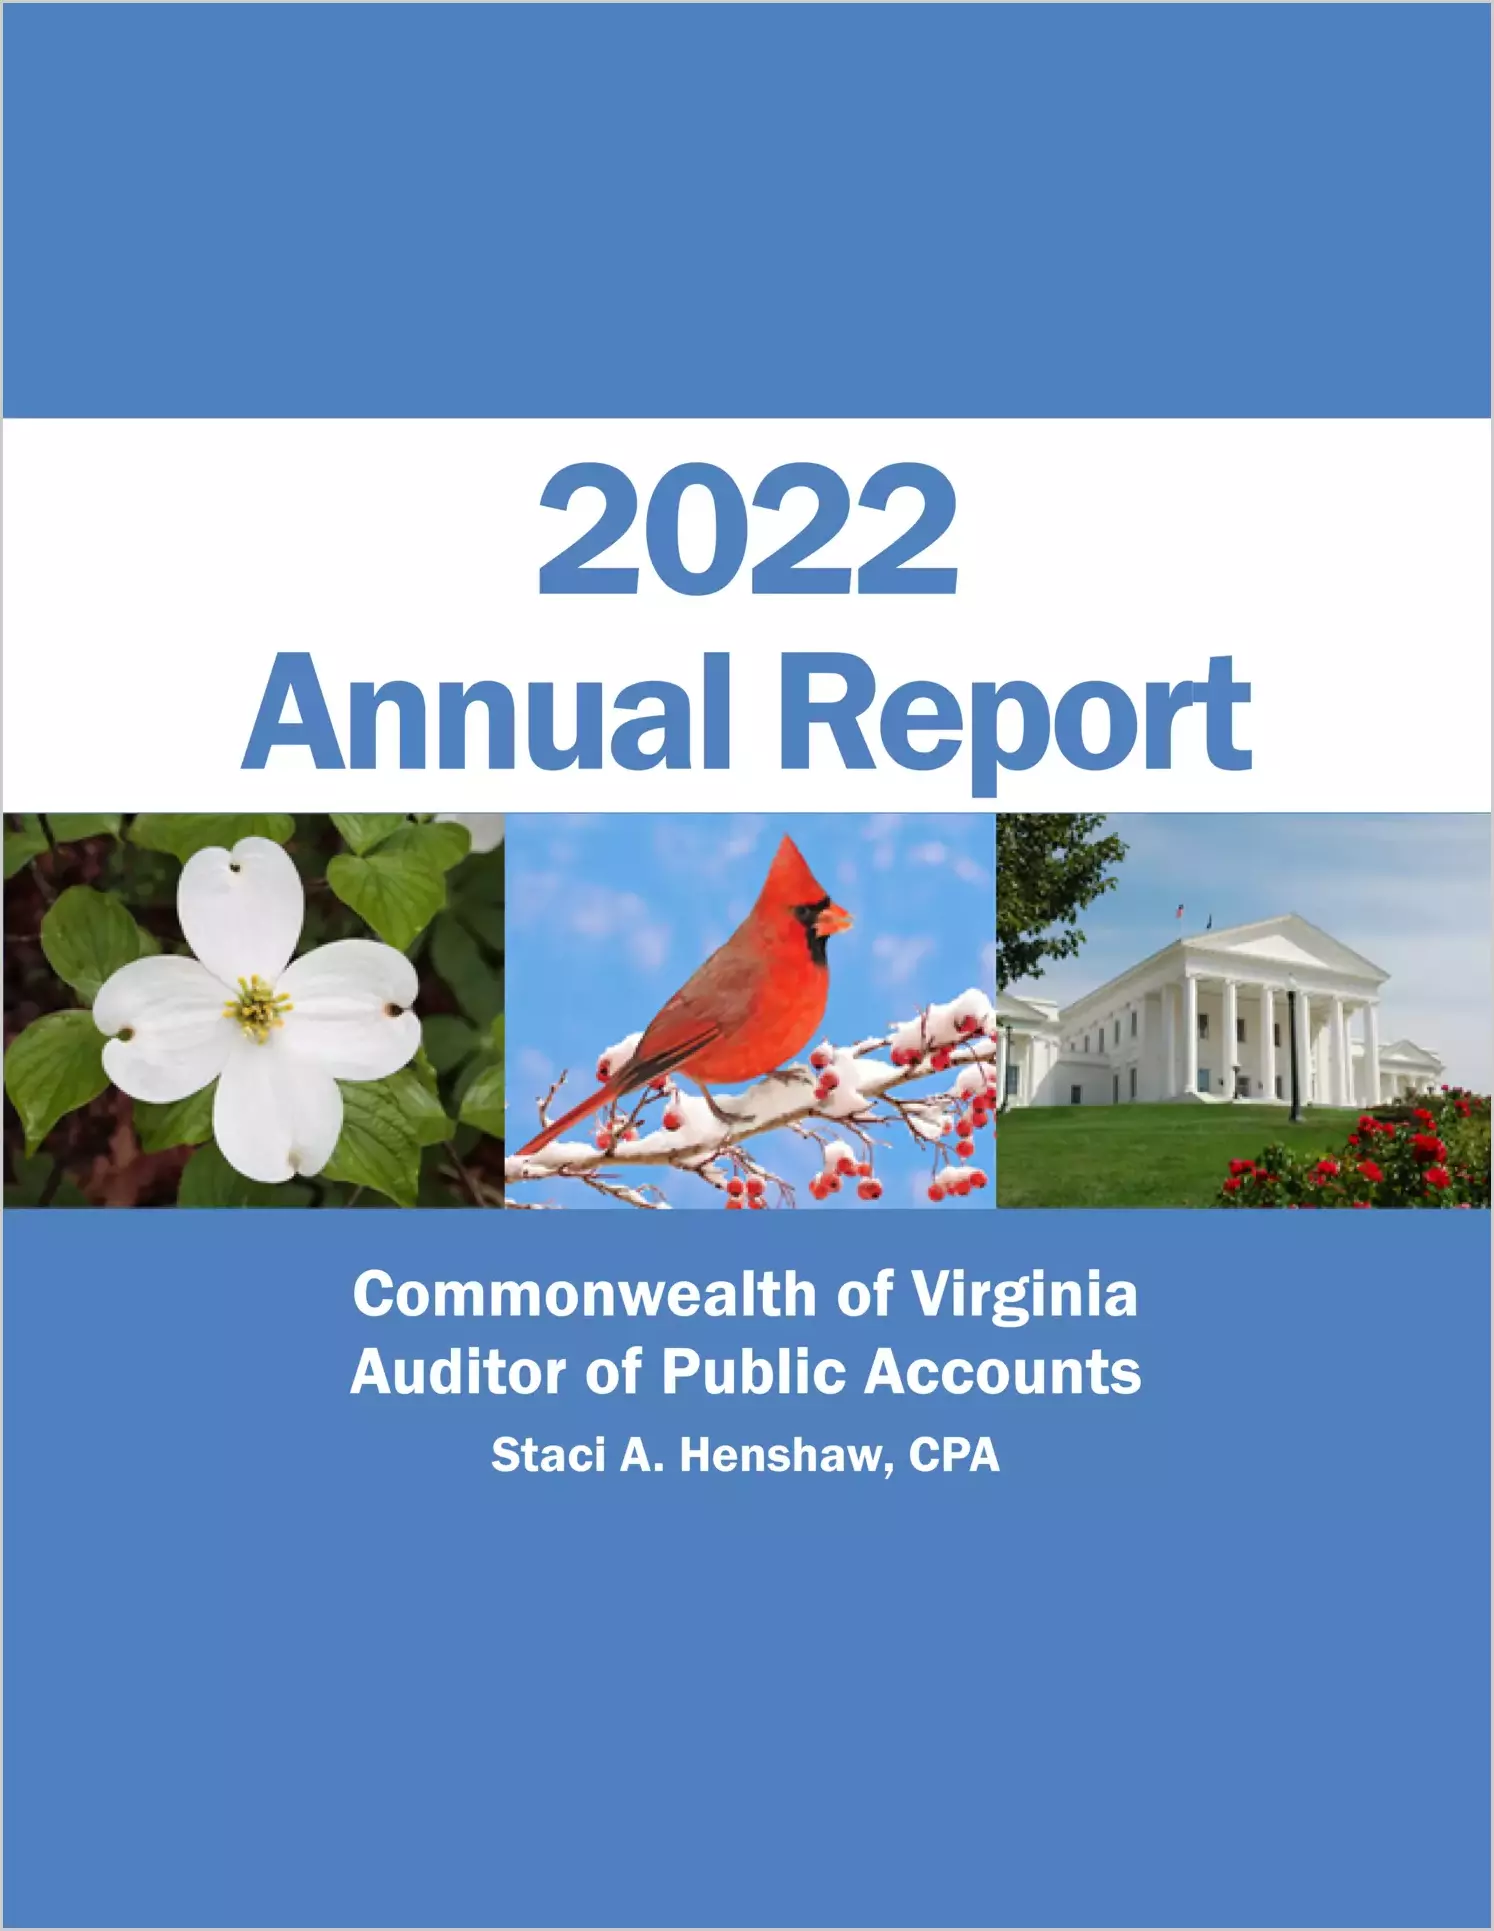 2022 Annual Report of the Auditor of Public Accounts